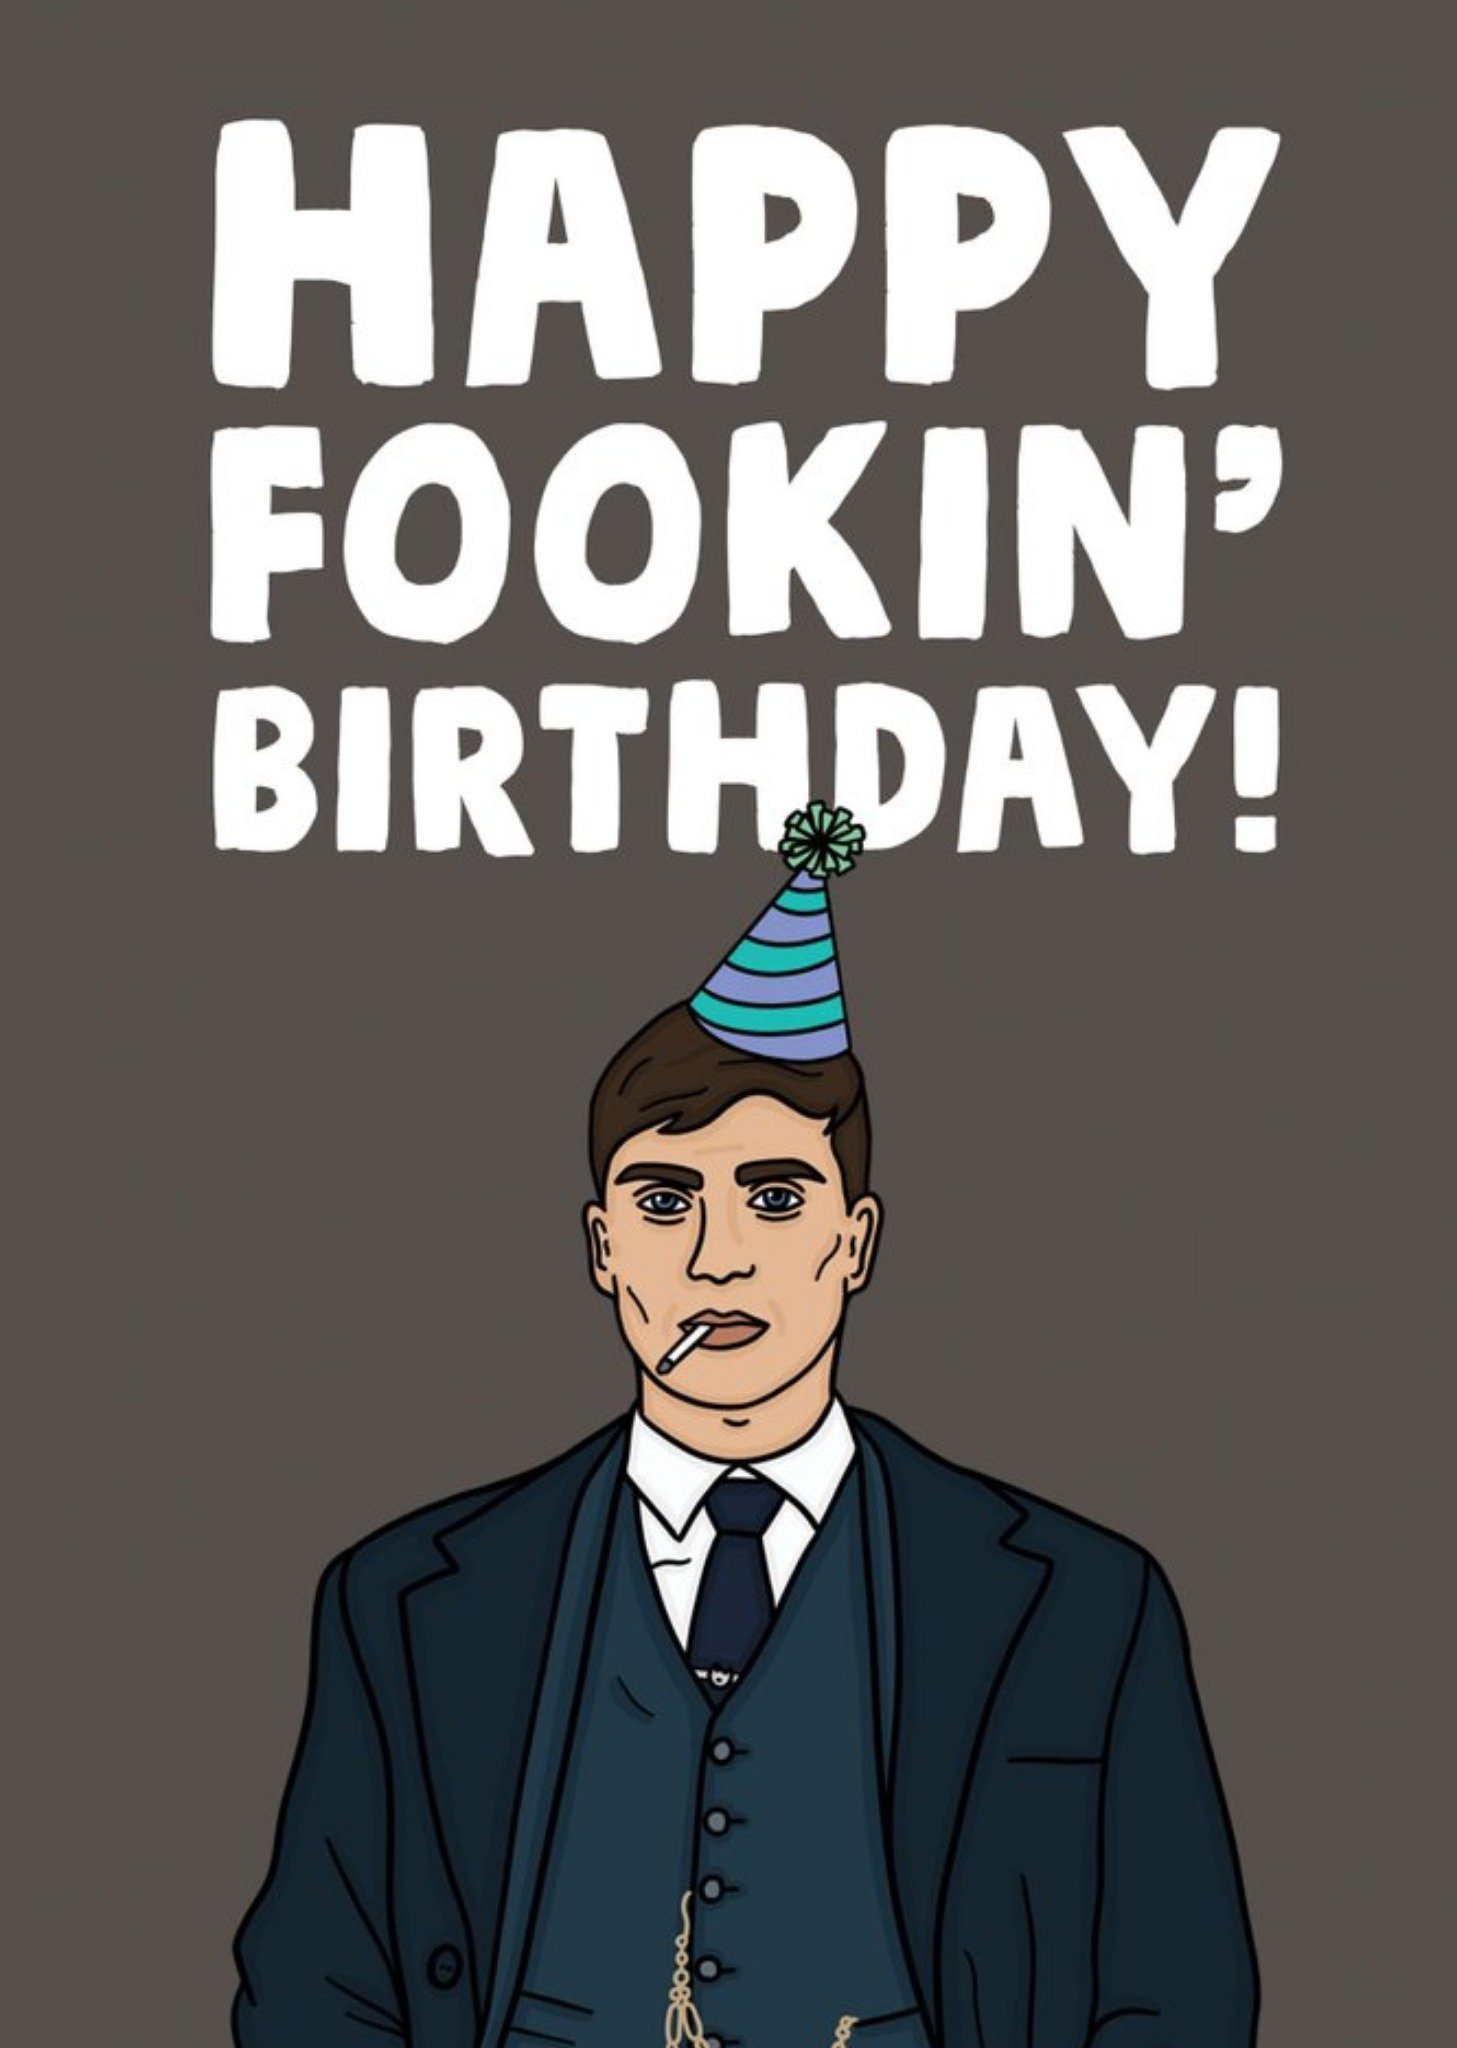 Moonpig Funny Gangster Happy Fookin' Birthday Card, Large